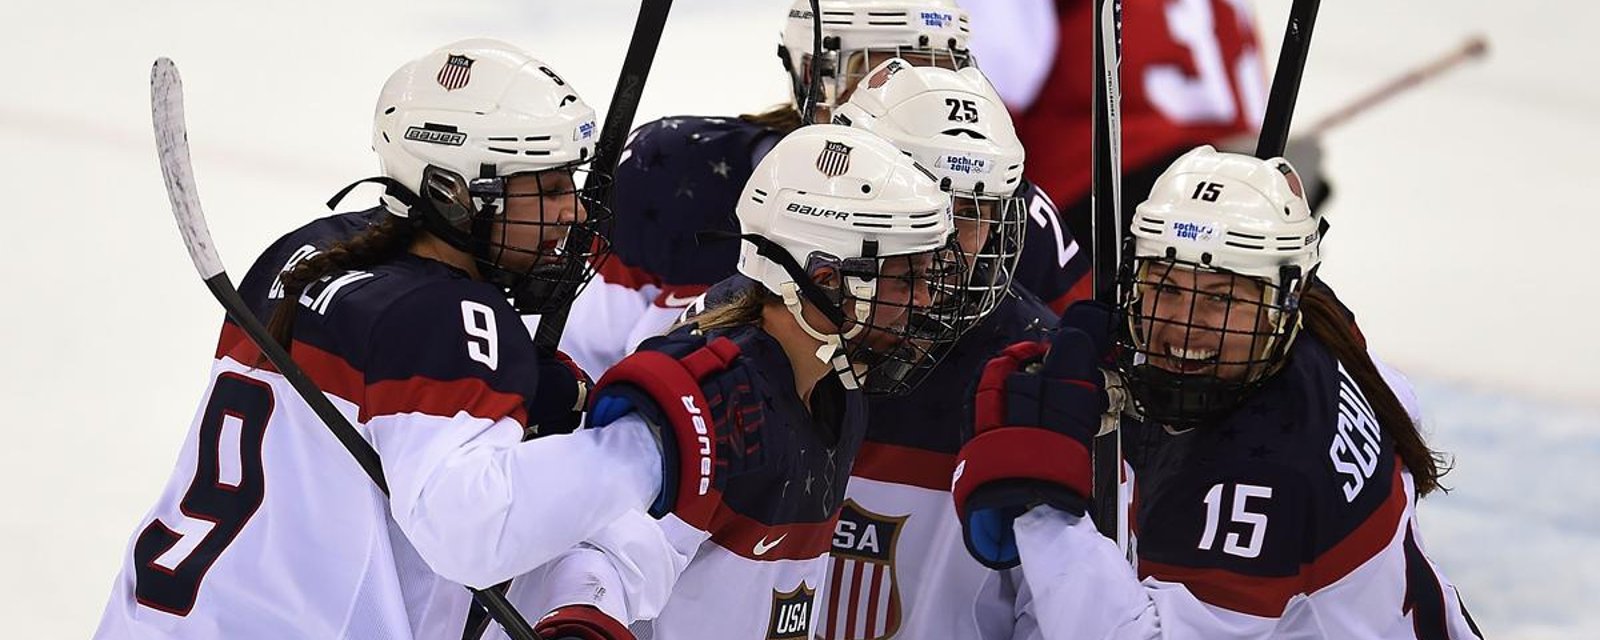 MAJOR support given to US Women hockey team. 